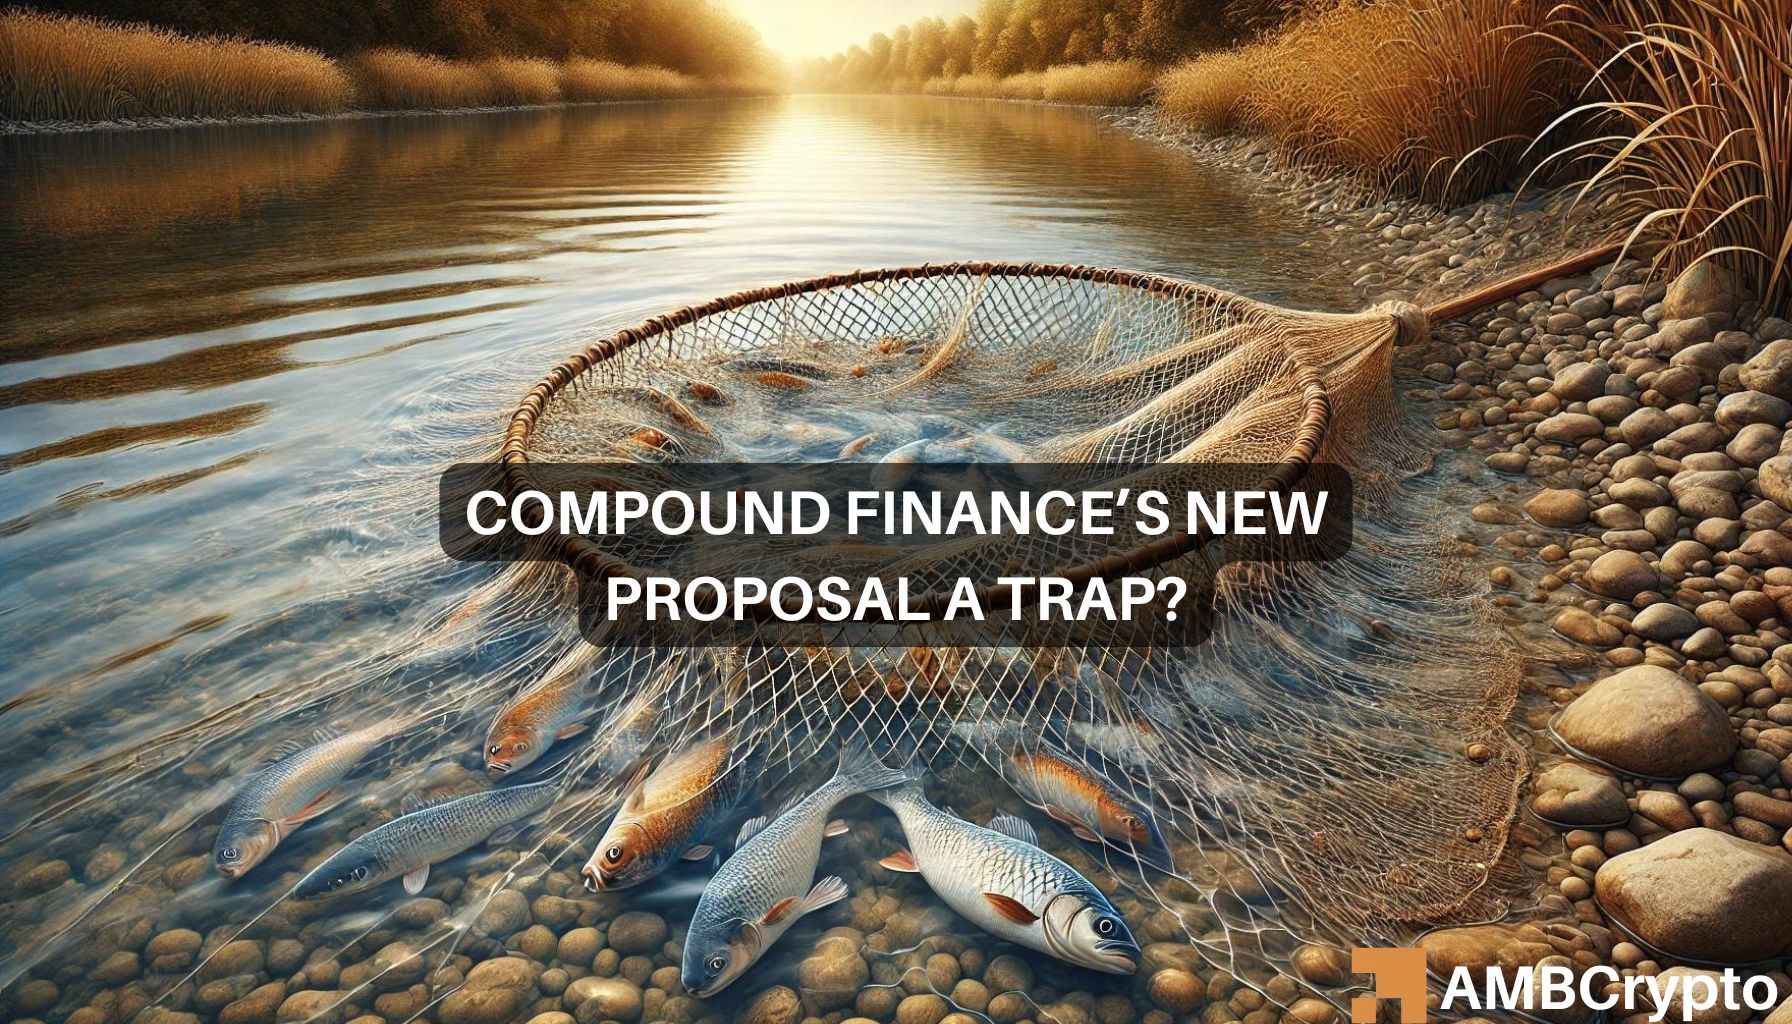 Compound Finance’s latest proposal: A governance attack or fair play?